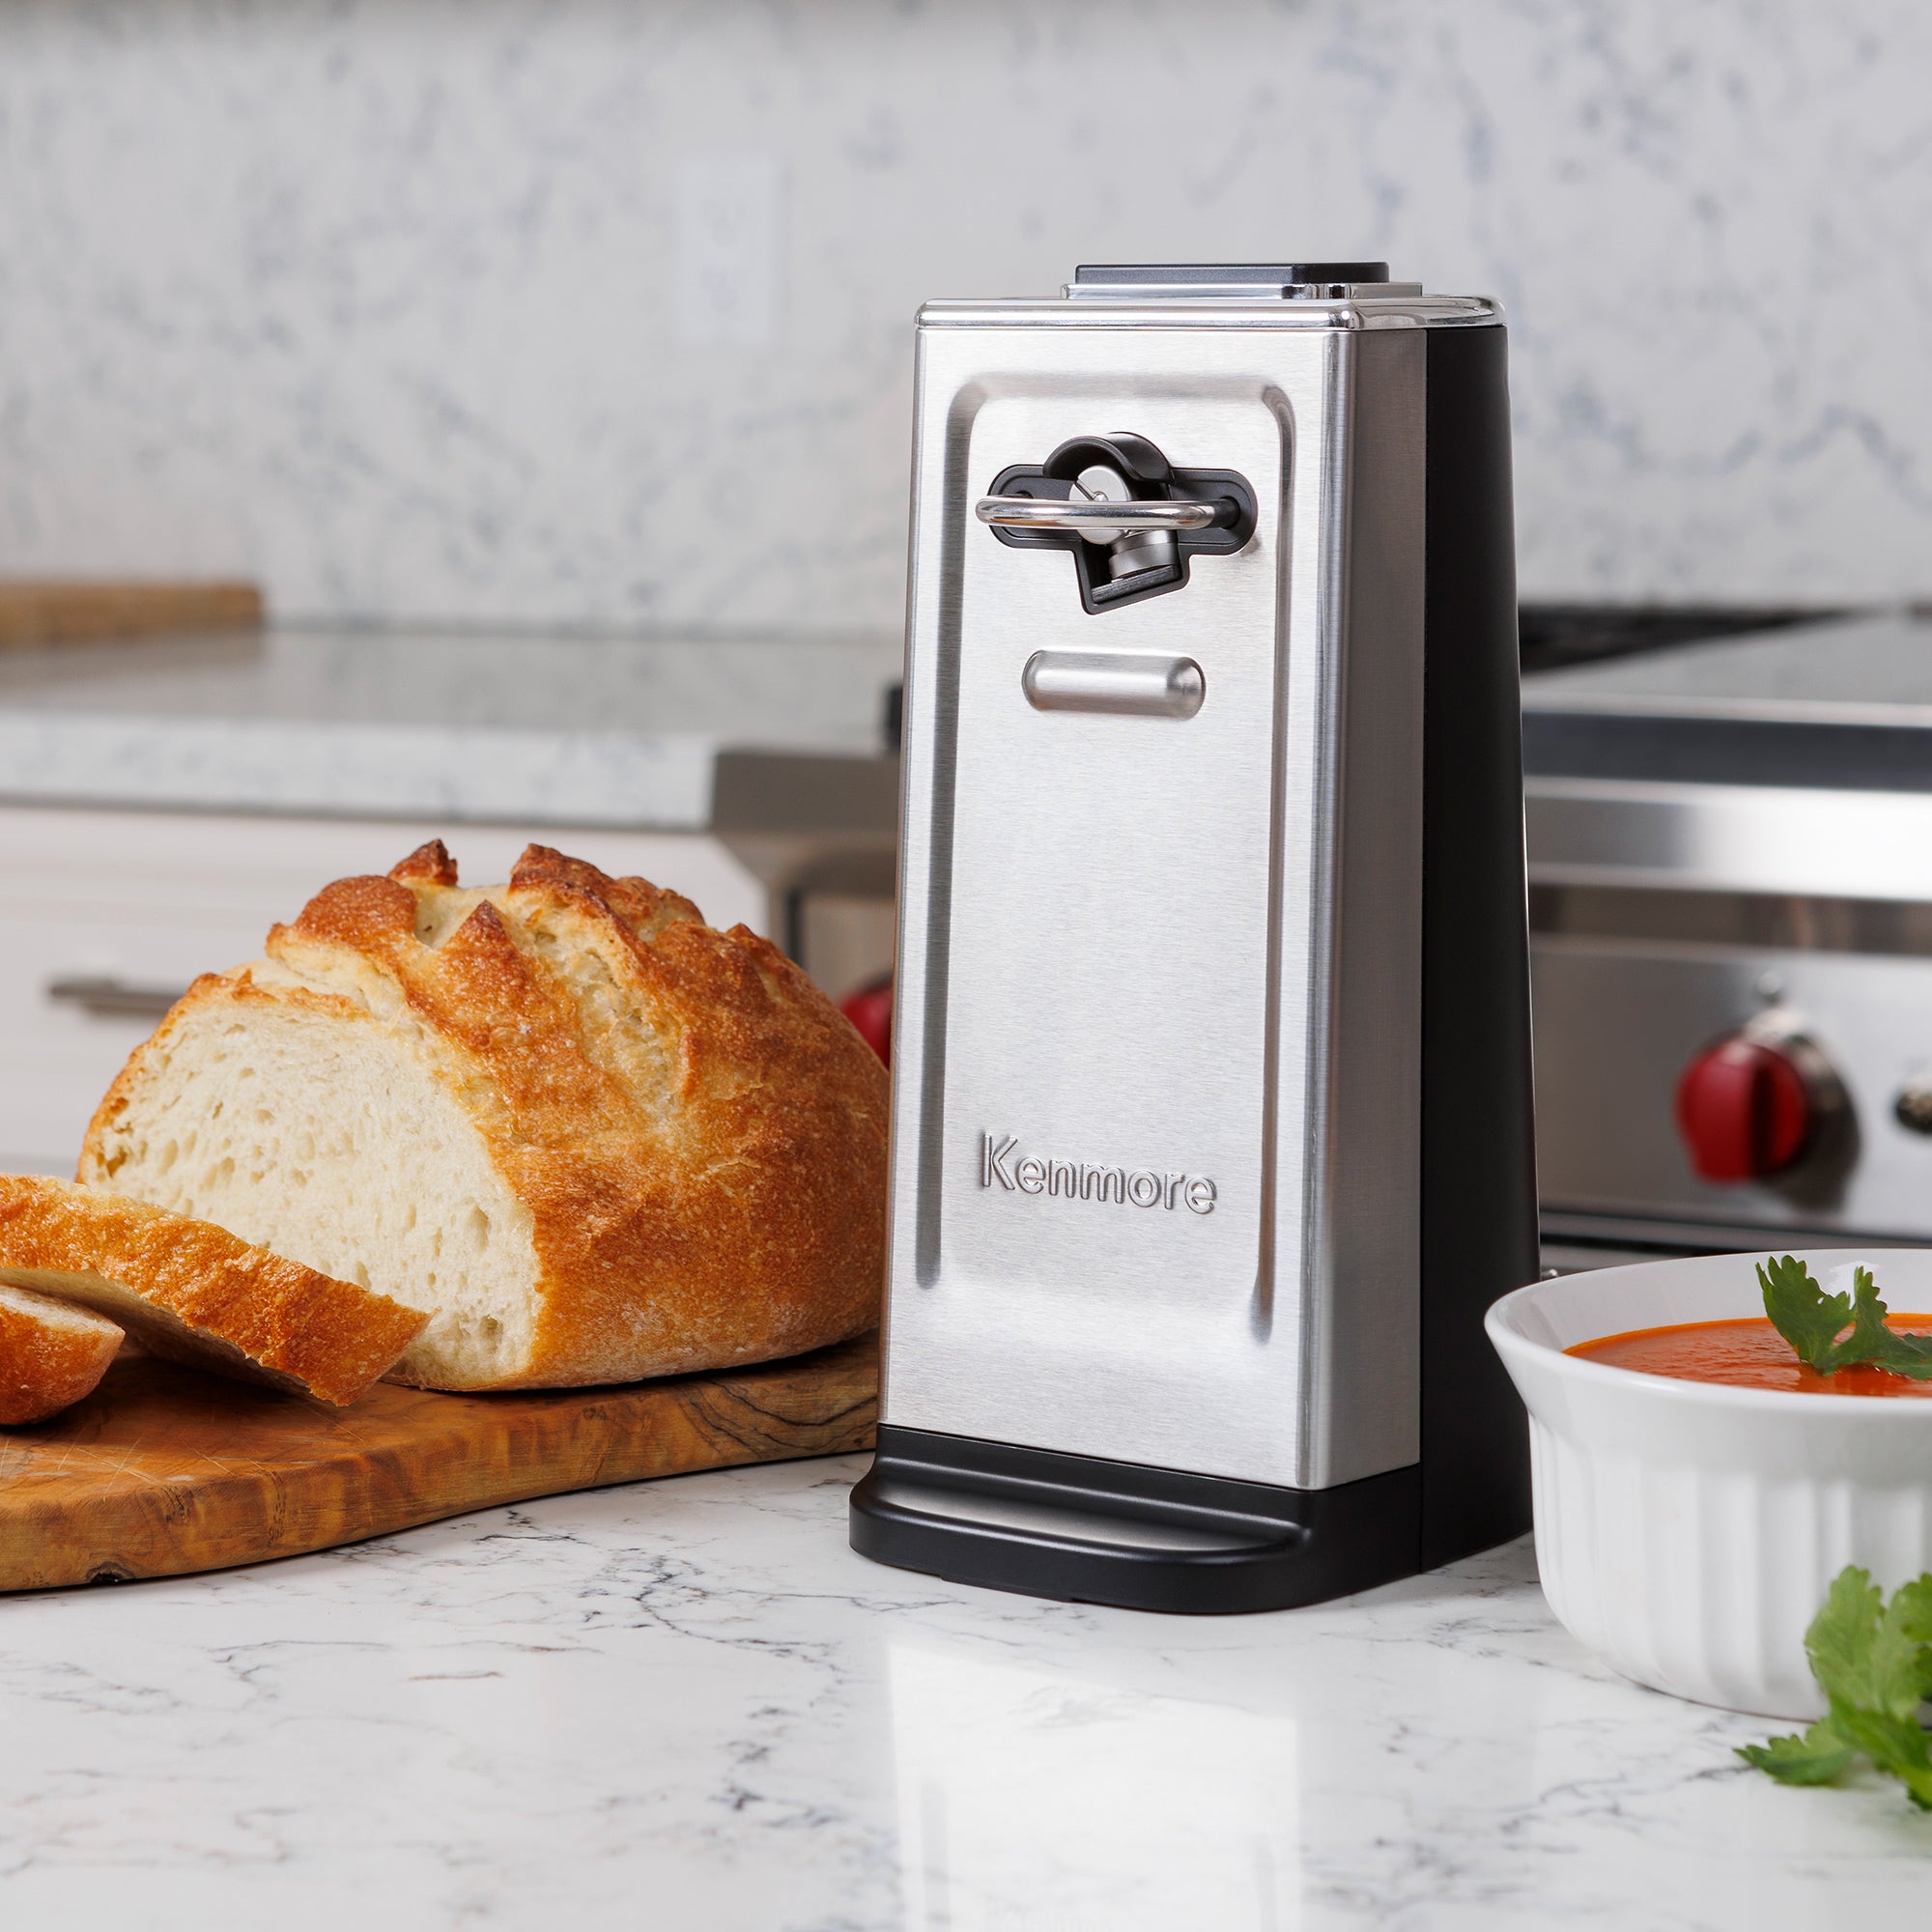 Kenmore stainless steel smooth-edge can opener on a white marble countertop with a loaf of bread beside it